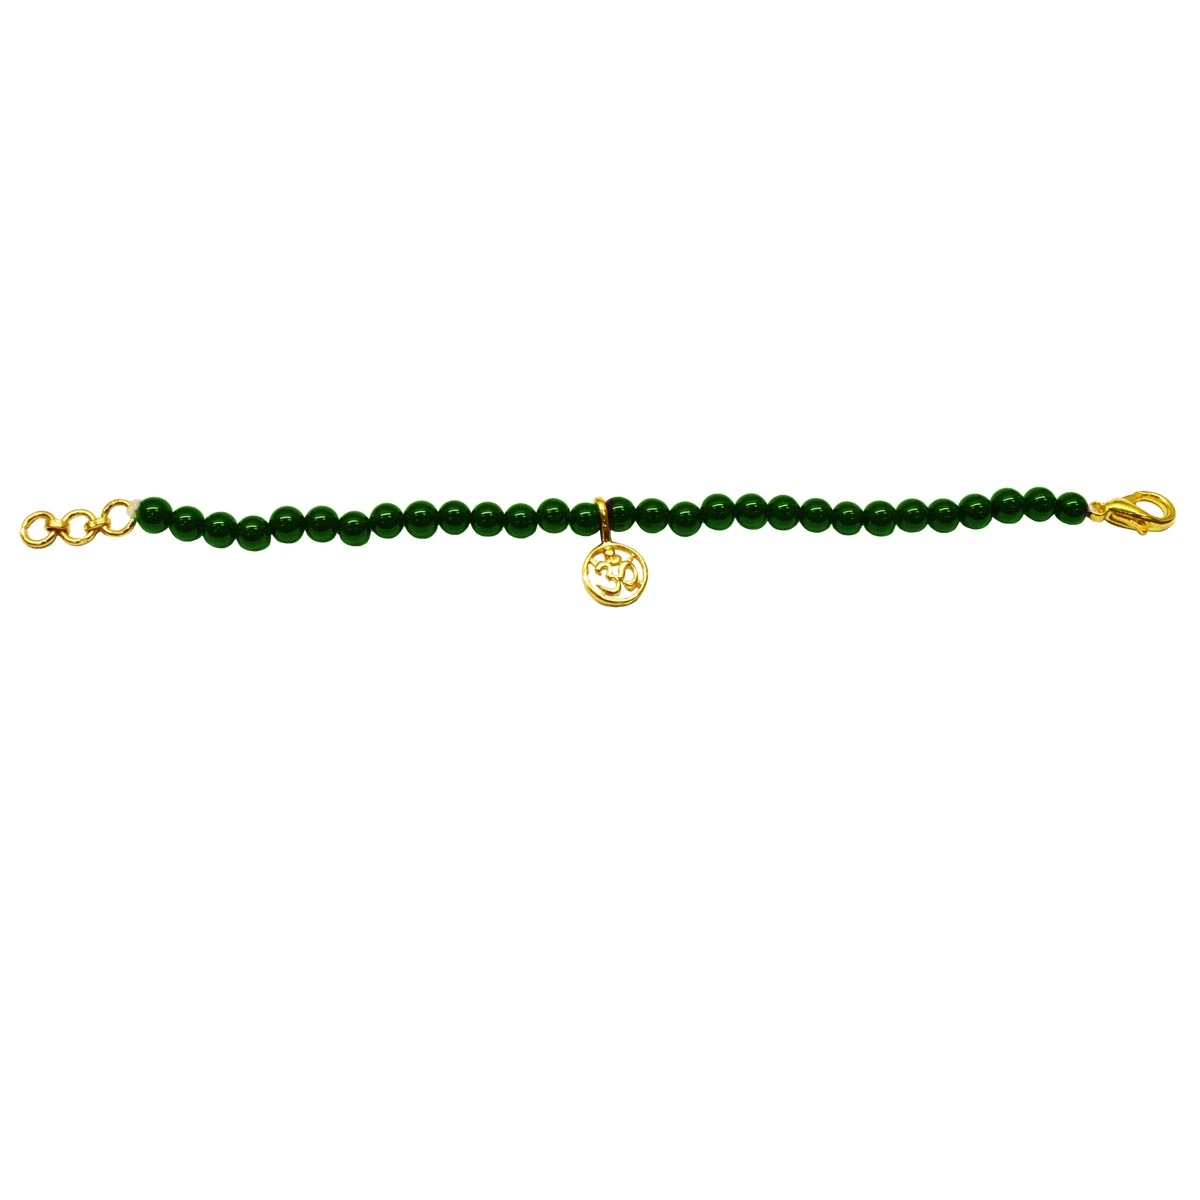 Gold Plated Sterling Silver Aum Charm with Green Onyx Bracelet (SB71)